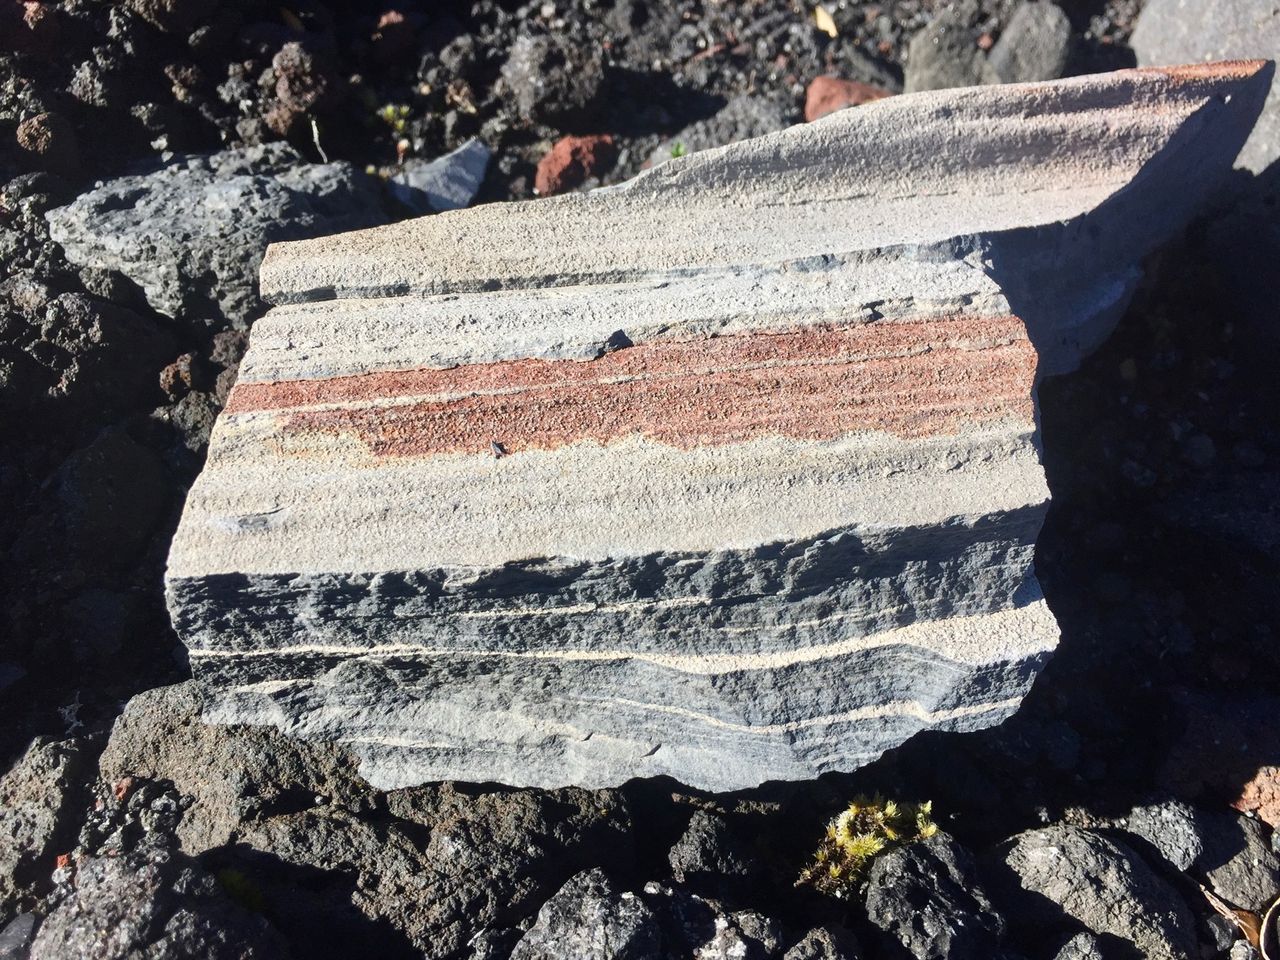 Sheet rock fragment with many layers.